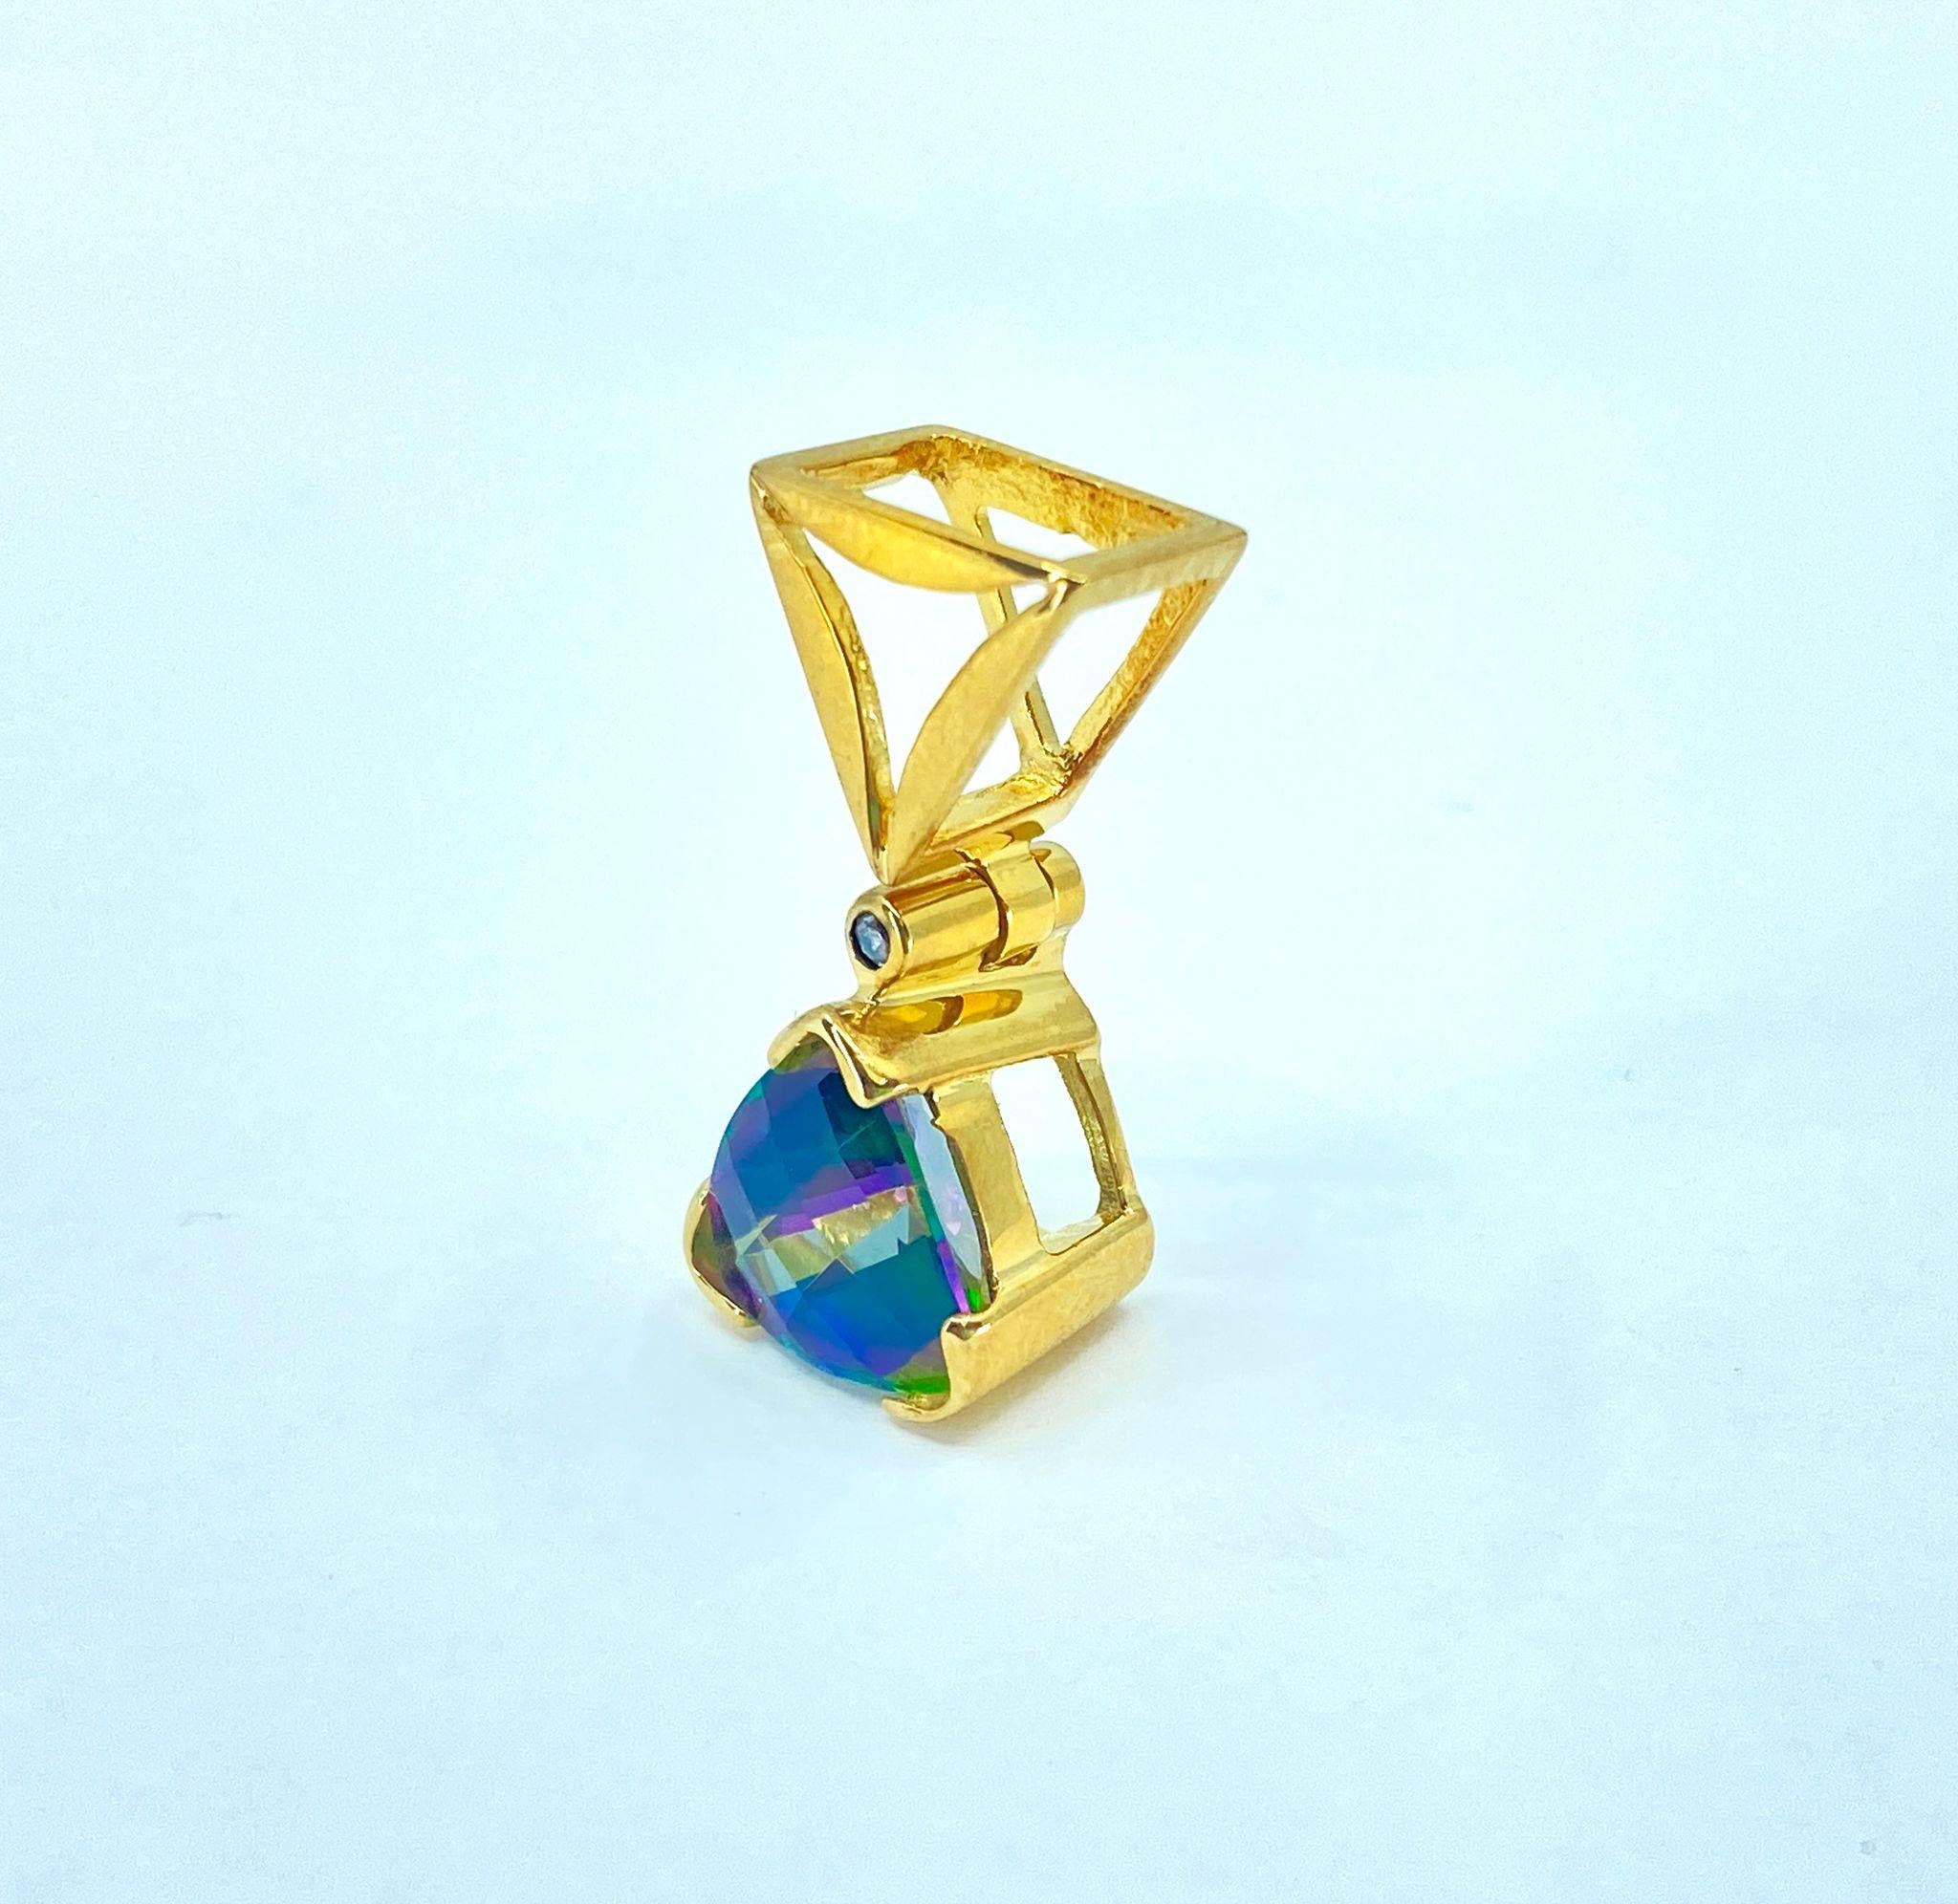 Crafted from luxurious 14k yellow gold, this stunning pendant features a captivating 3-carat mystic topaz with a mesmerizing blue-green color hue. Adding to its allure, a solitaire diamond adorns the bail, boasting VS clarity and F color for